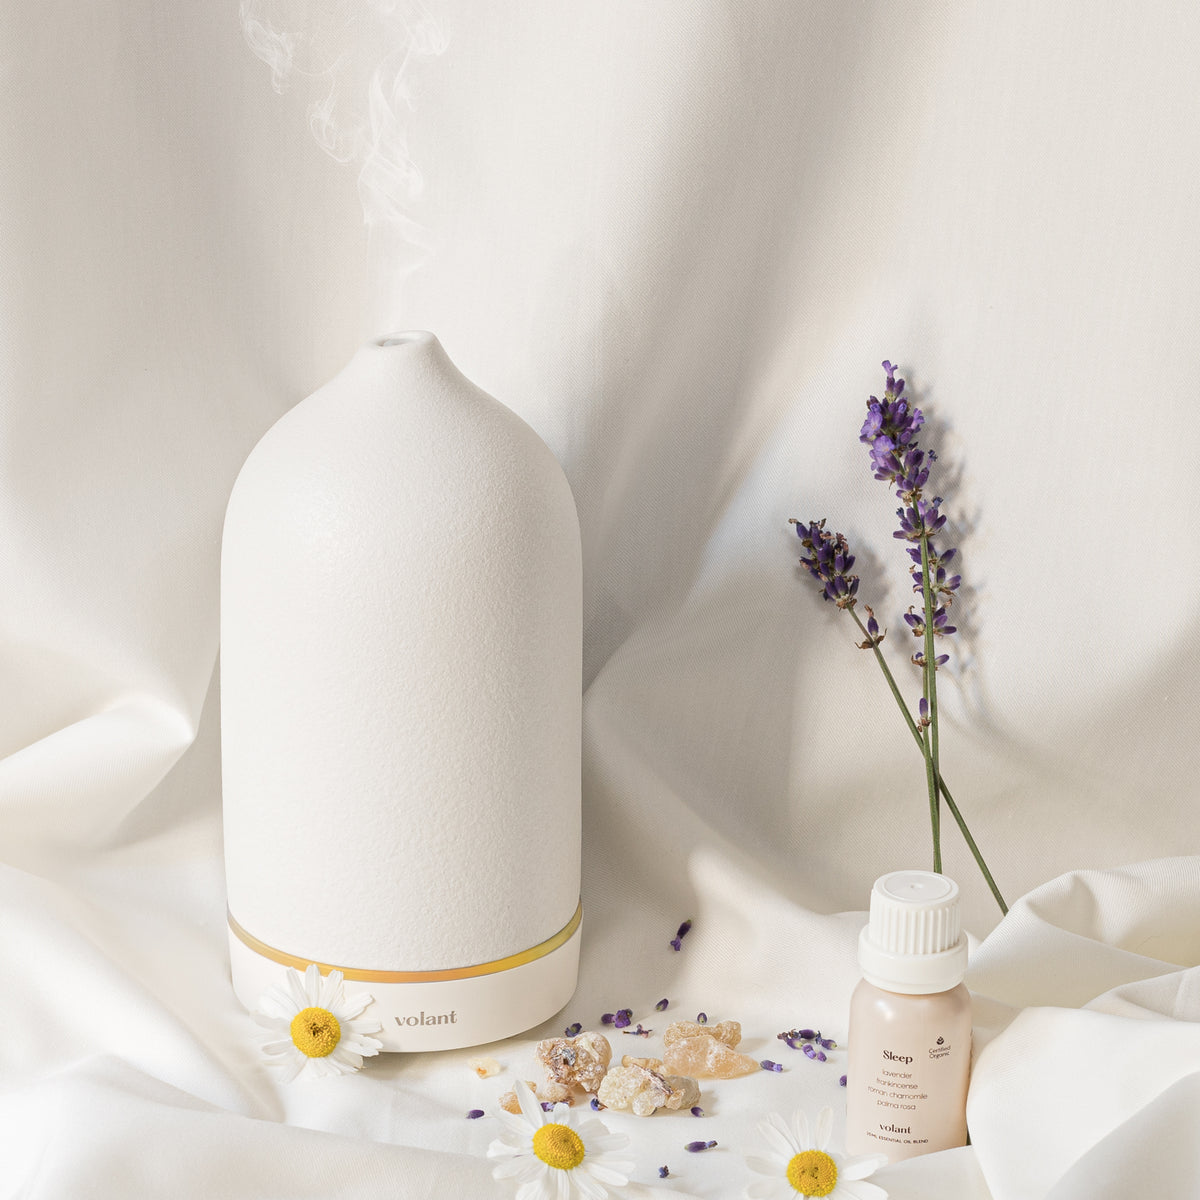 volant white diffuser using sleep essential oil blend made with pure Lavender, Frankincense, and Palma Rosa and Roman Chamomile